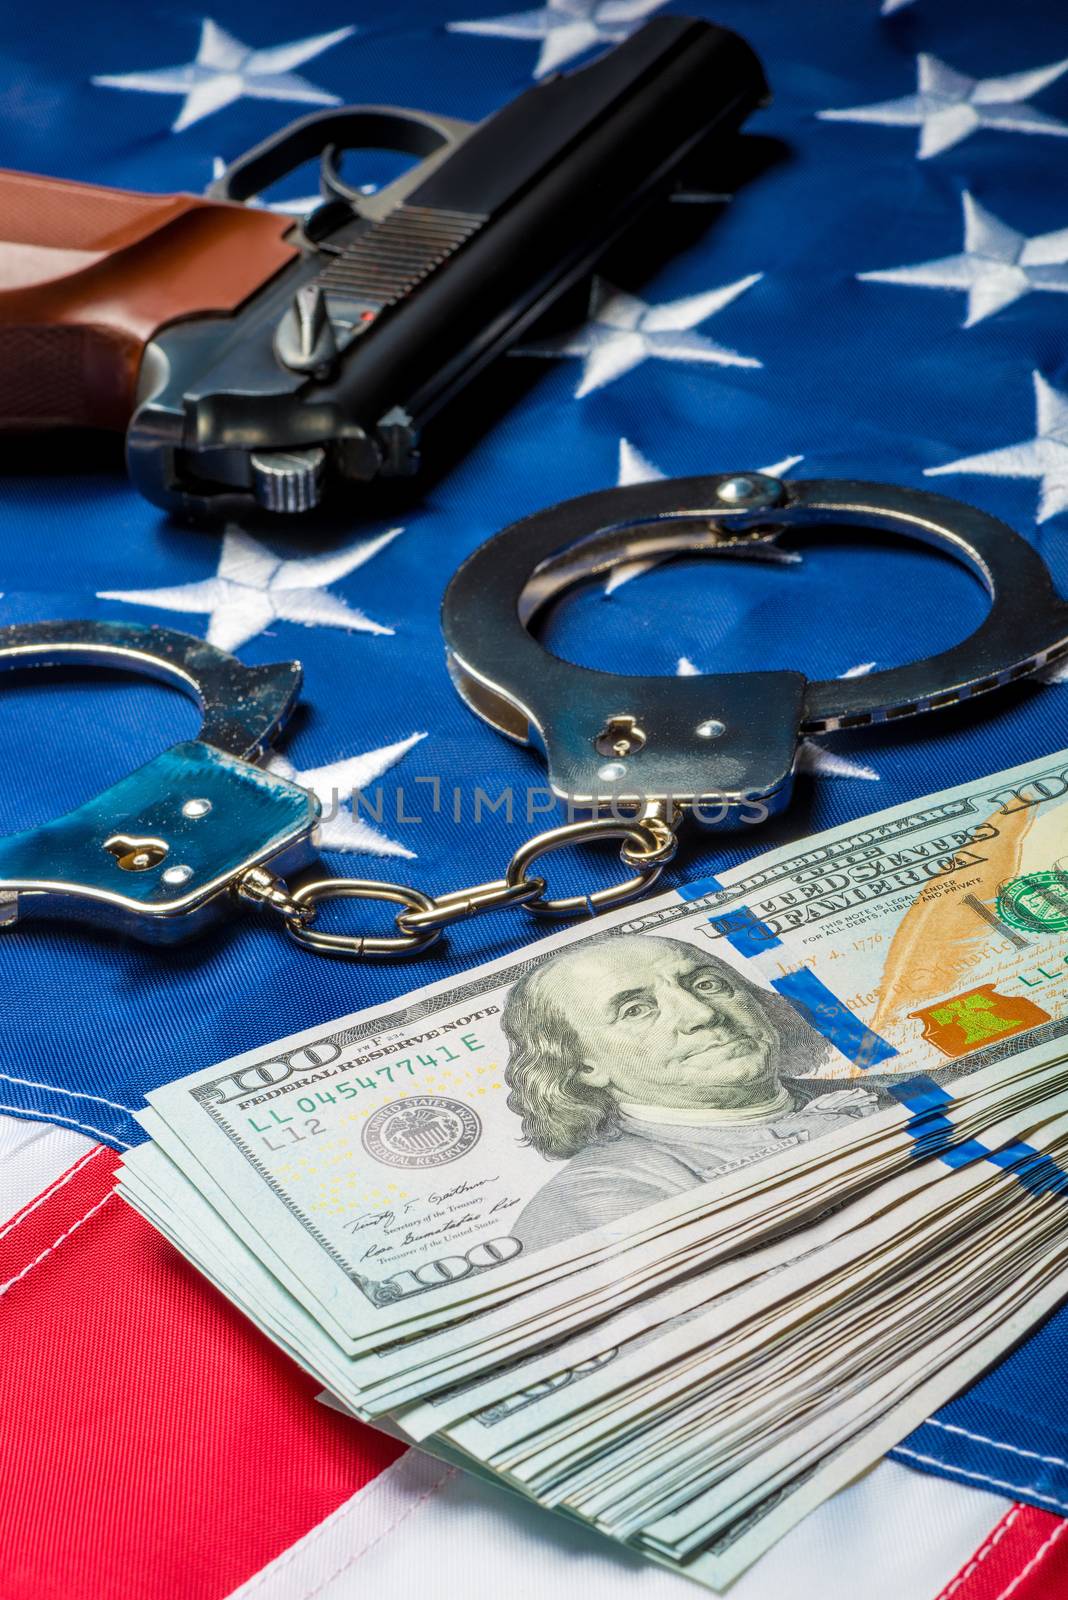 crime and punishment seized money and weapons on the American fl by kosmsos111